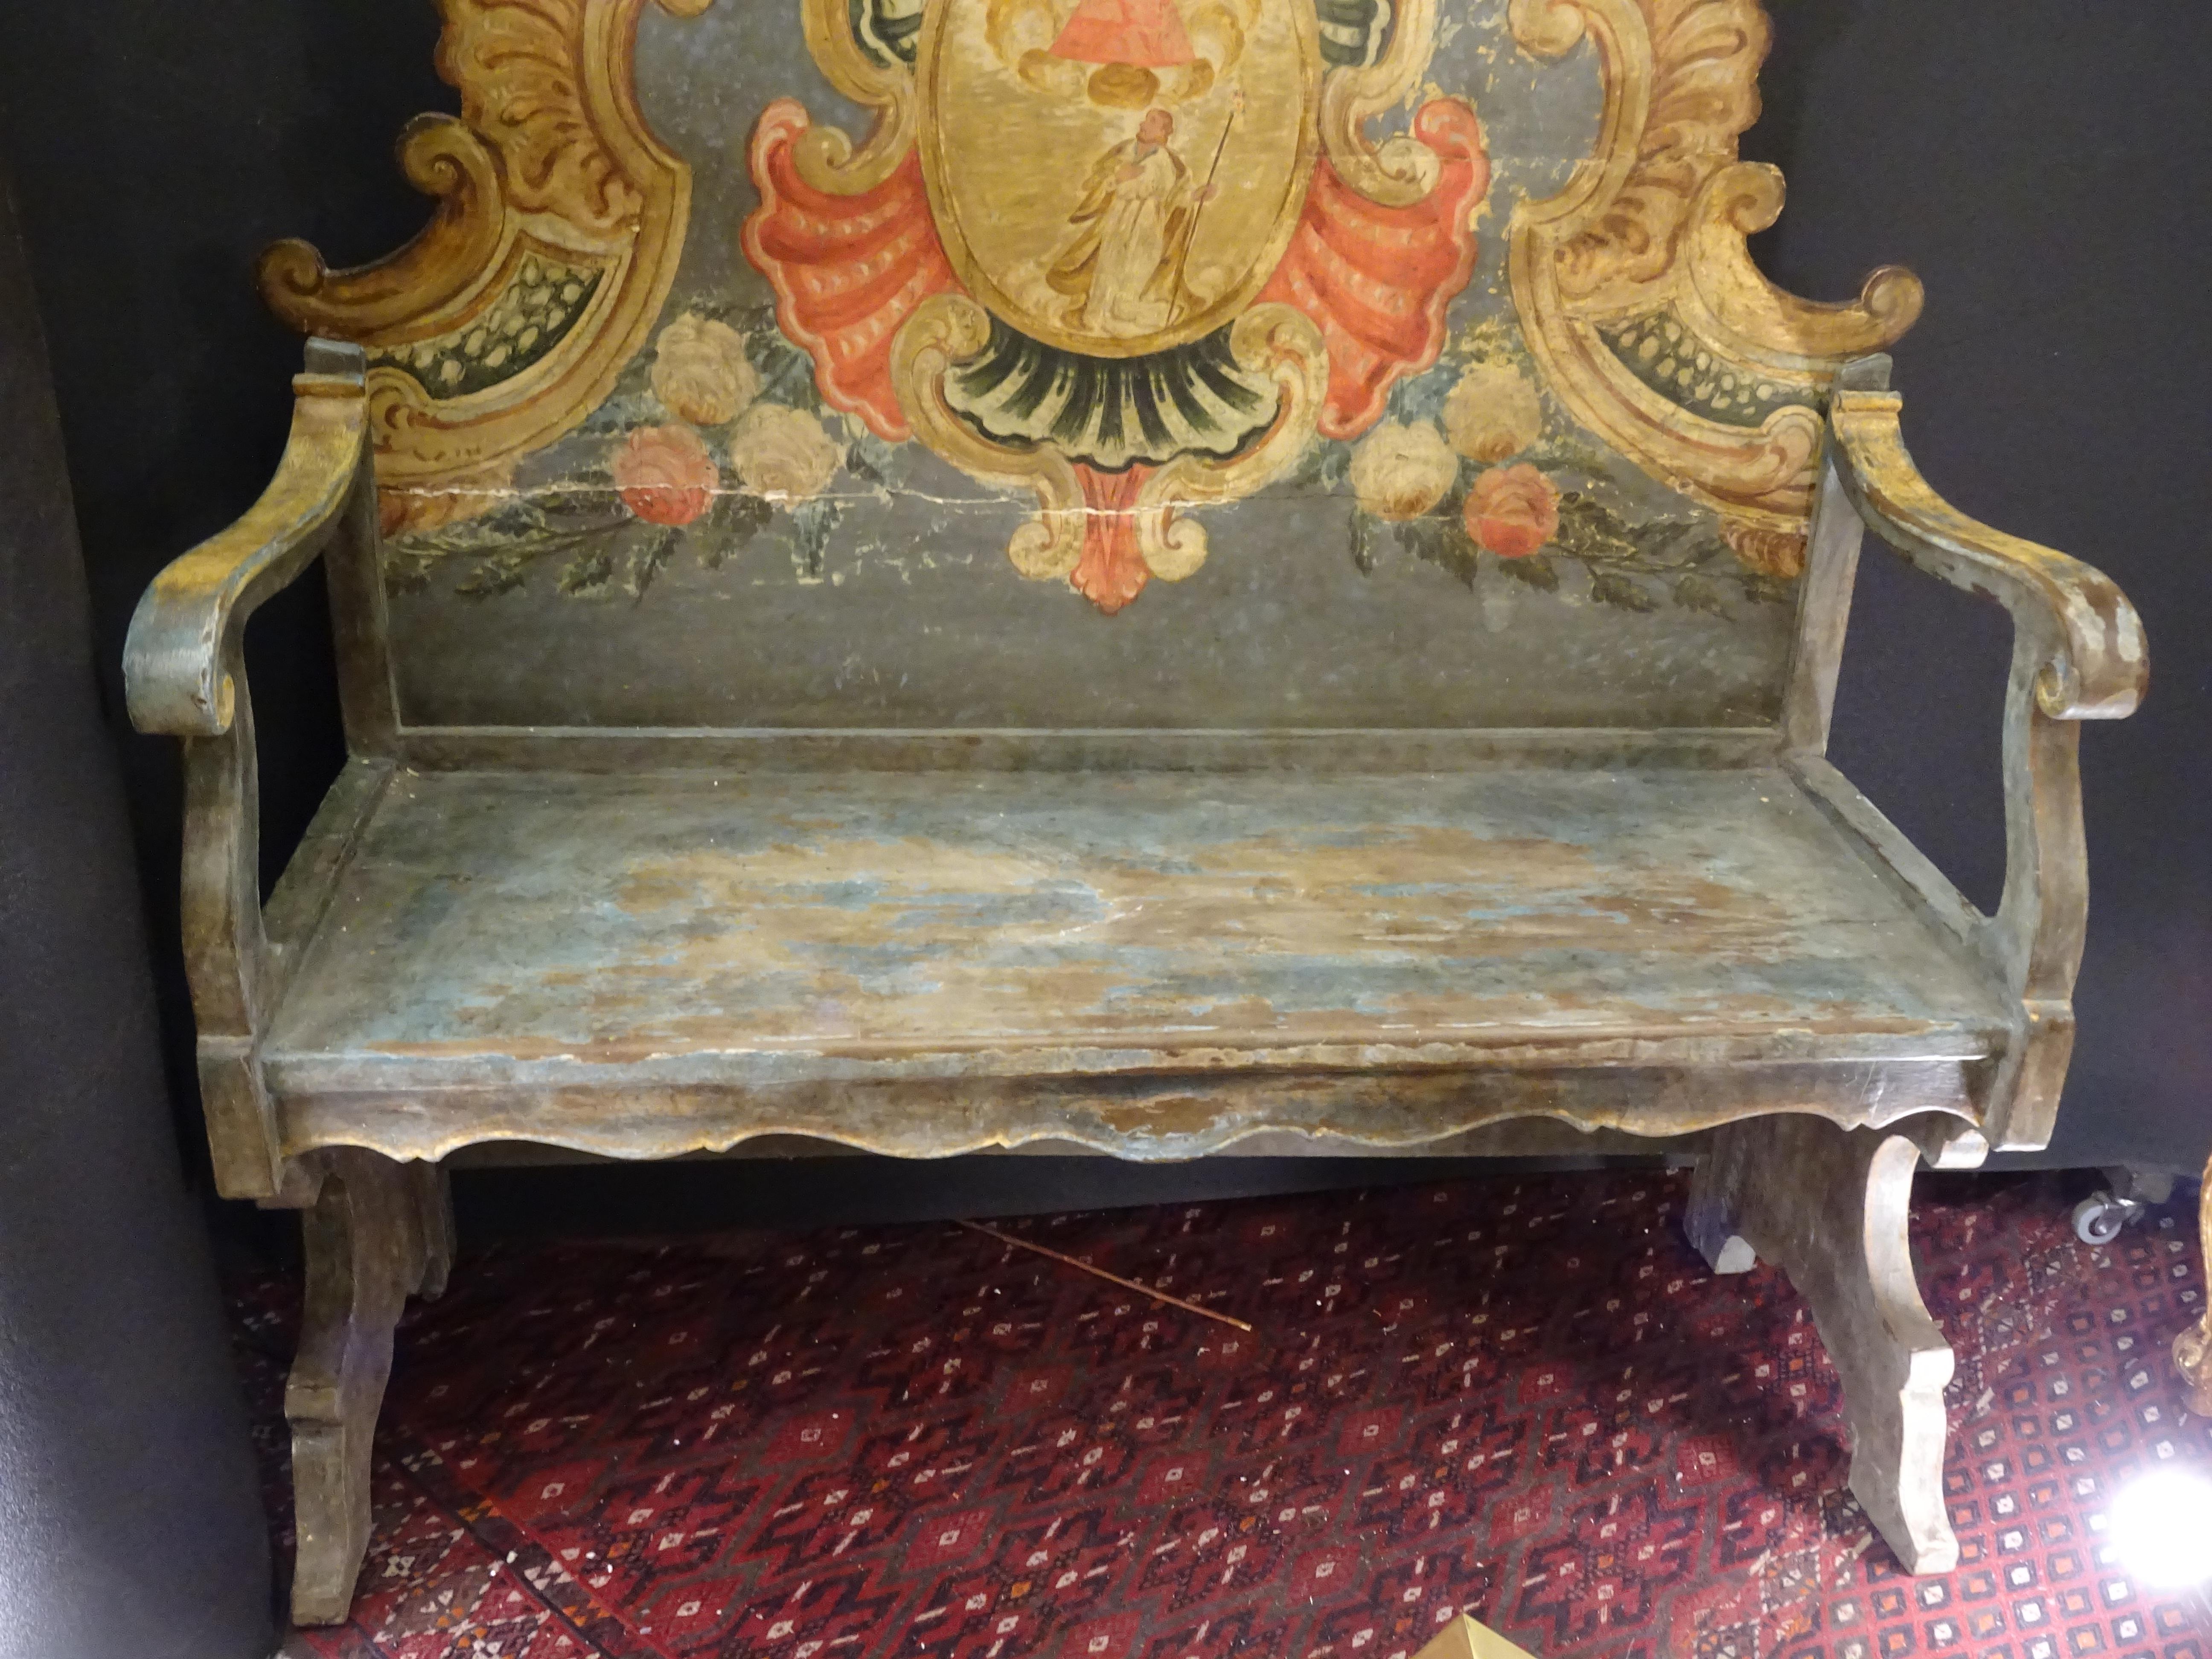 Hand-Painted 18th Century Majorcan Pink and Blue Floral Hand Painted Wood Bench